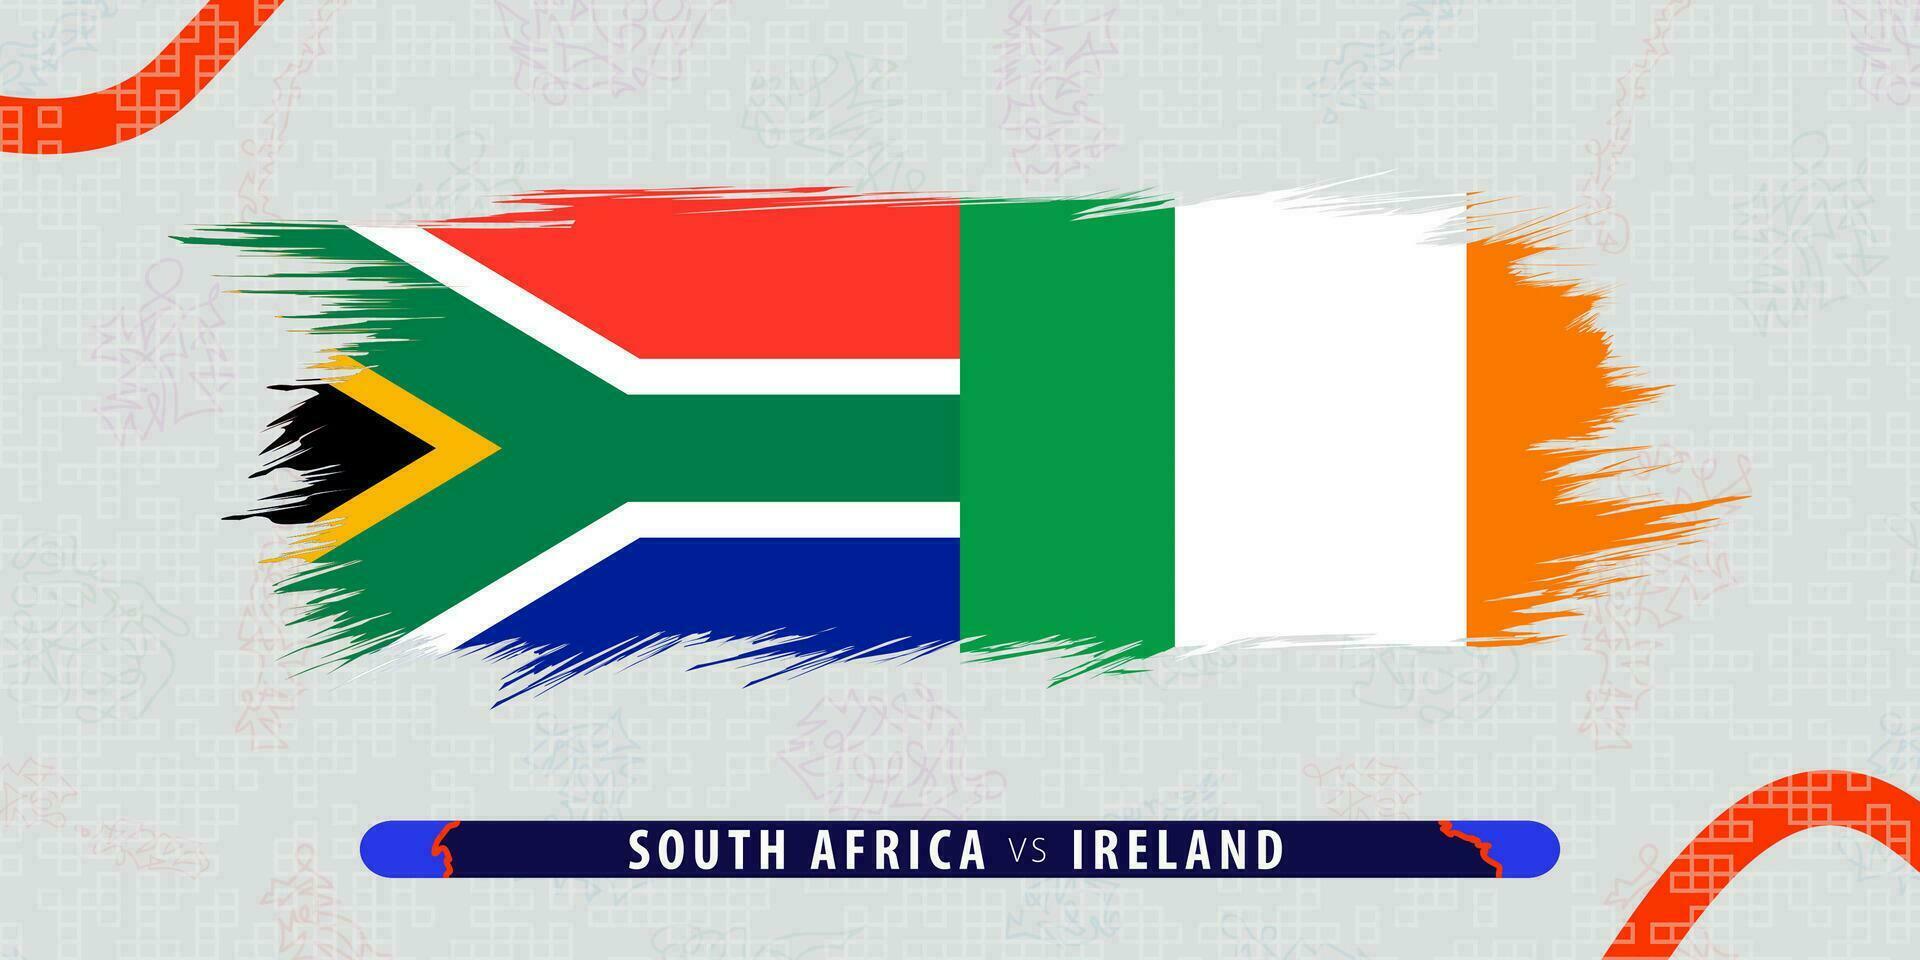 South Africa vs Ireland, international rugby match illustration in brushstroke style. Abstract grungy icon for rugby match. vector